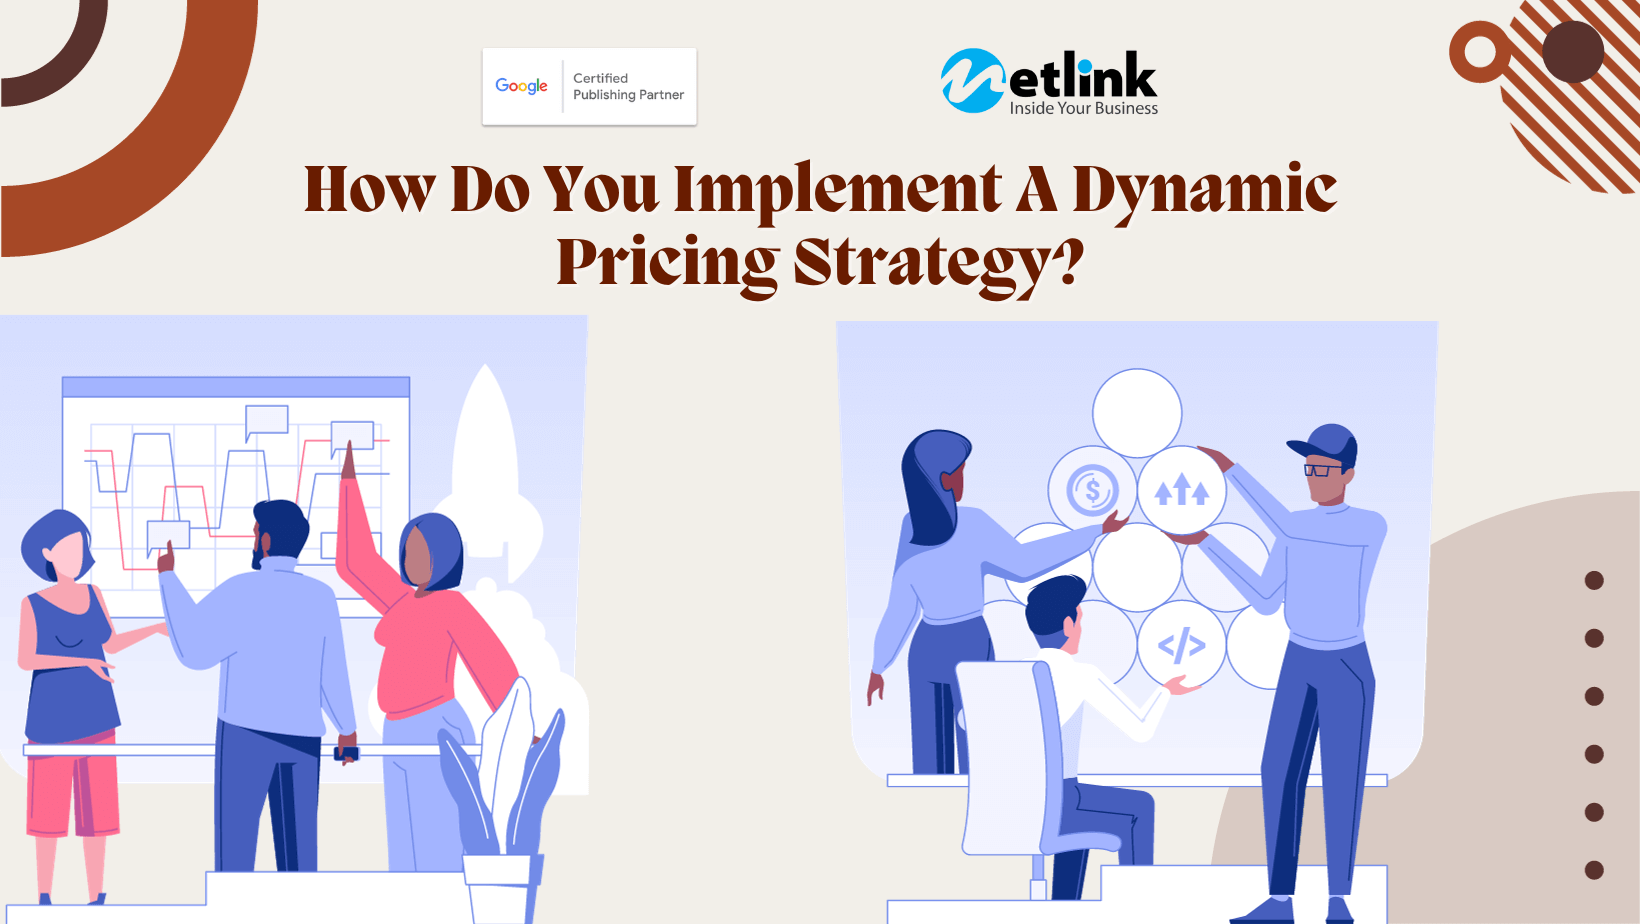 How Do You Implement A Dynamic Pricing Strategy?